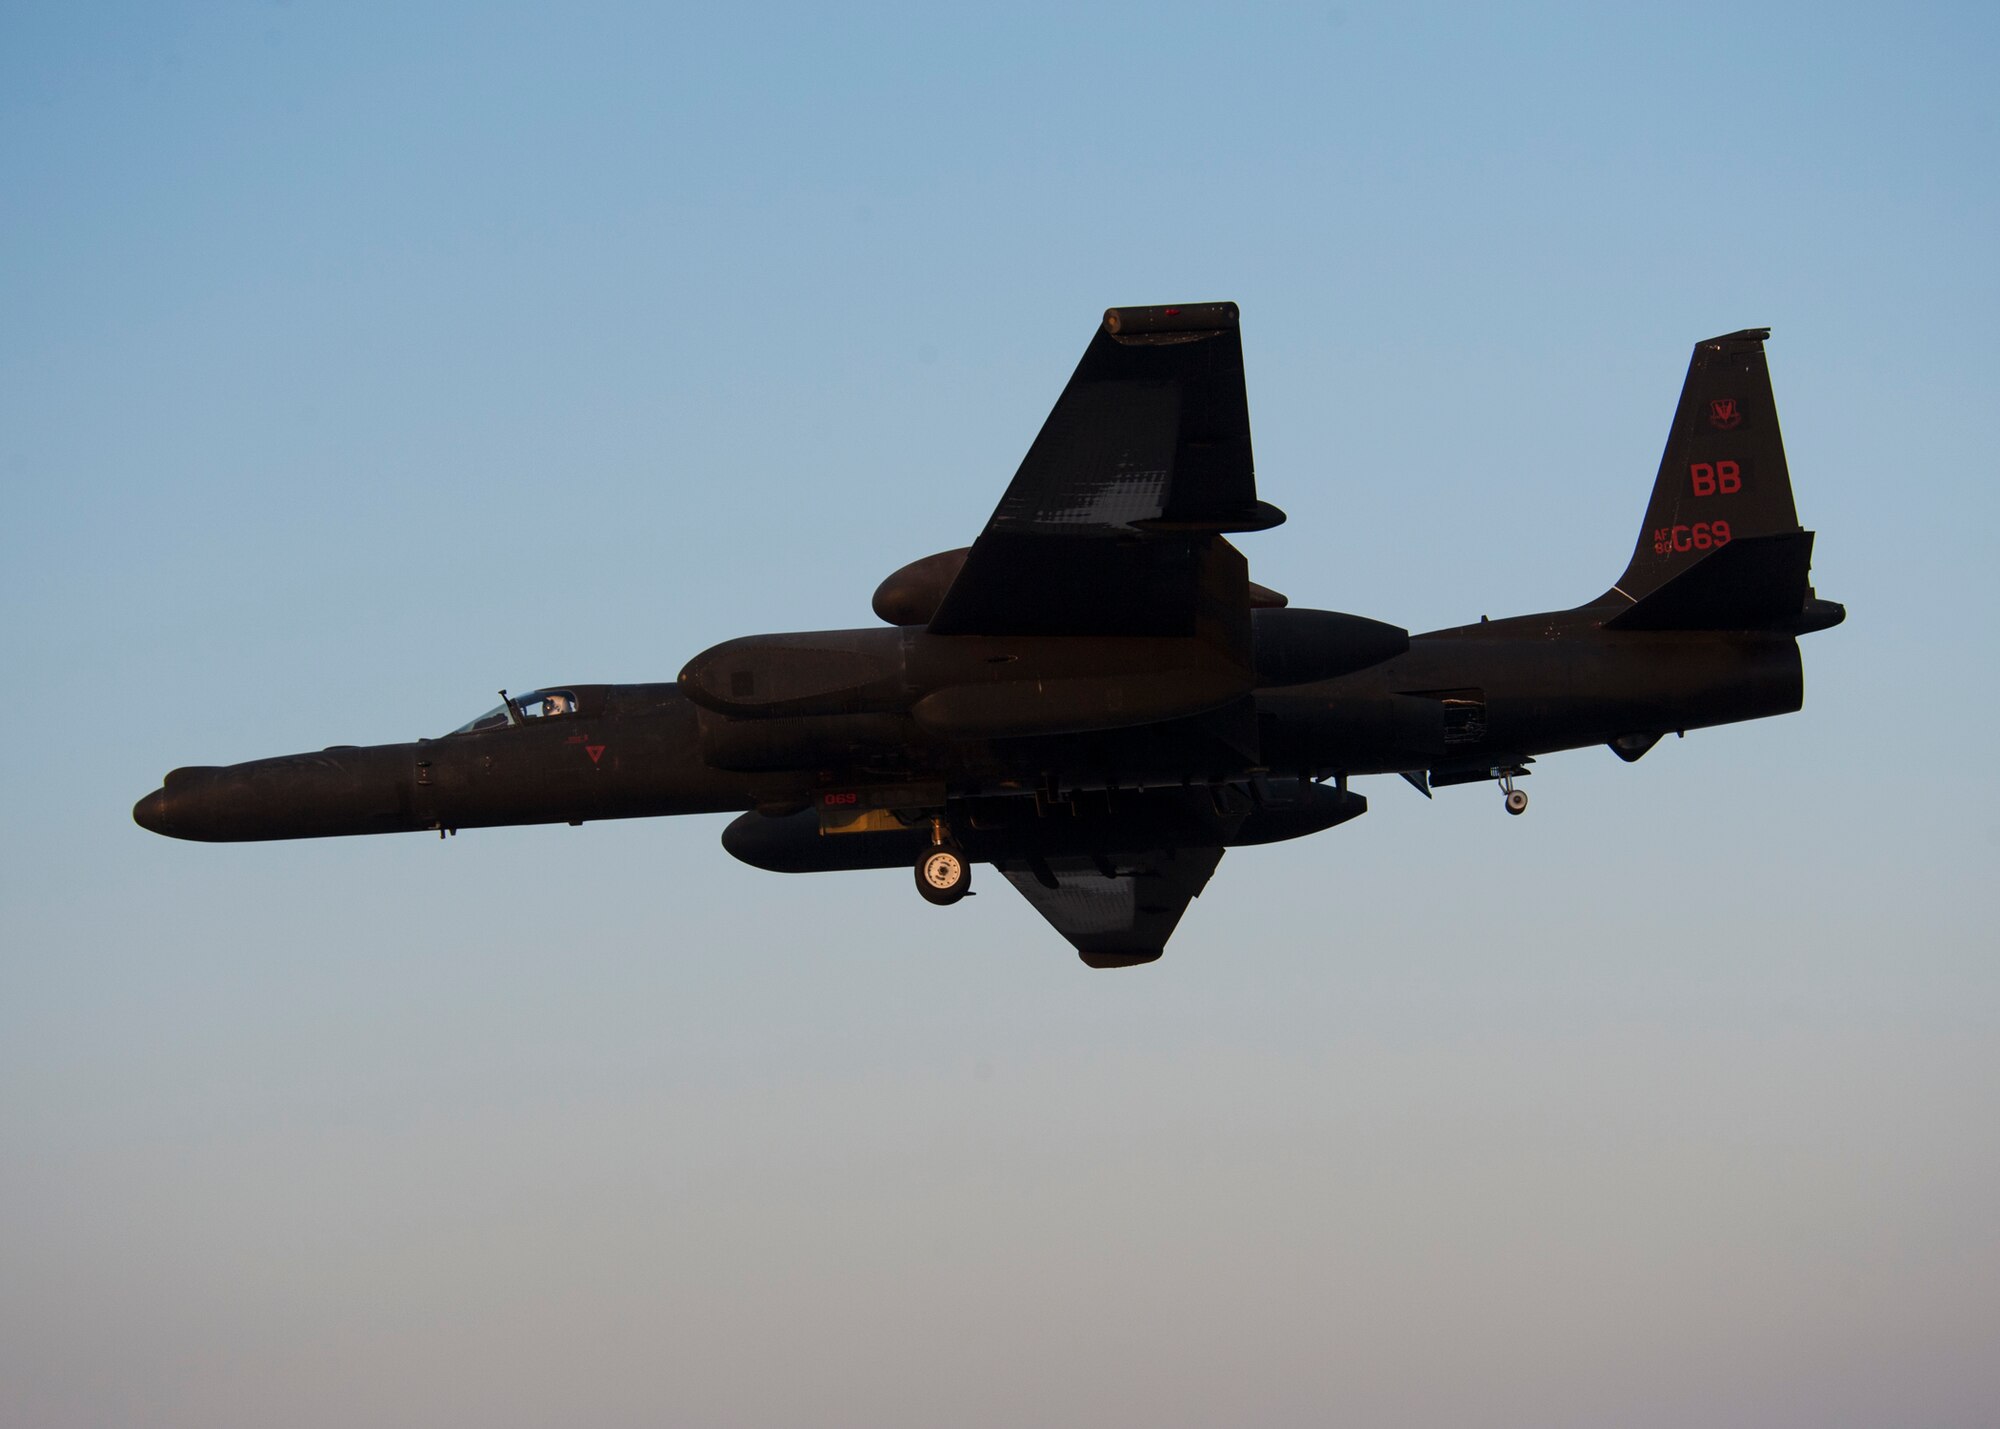 Air Force Maj. Ralph Shoukry, a pilot and tactics and employment lead assigned to the 99th Expeditionary Reconnaissance Squadron, flies a U-2 Dragonlady in for landing at an undisclosed location in Southwest Asia, March 6, 2014. Throughout his career Shoukry has supported Operation Iraqi Freedom, Enduring Freedom and Odyssey Dawn flying missions over Iraq, Afghanistan and Libya. (U.S. Air Force photo by Staff Sgt. Michael Means/Released)